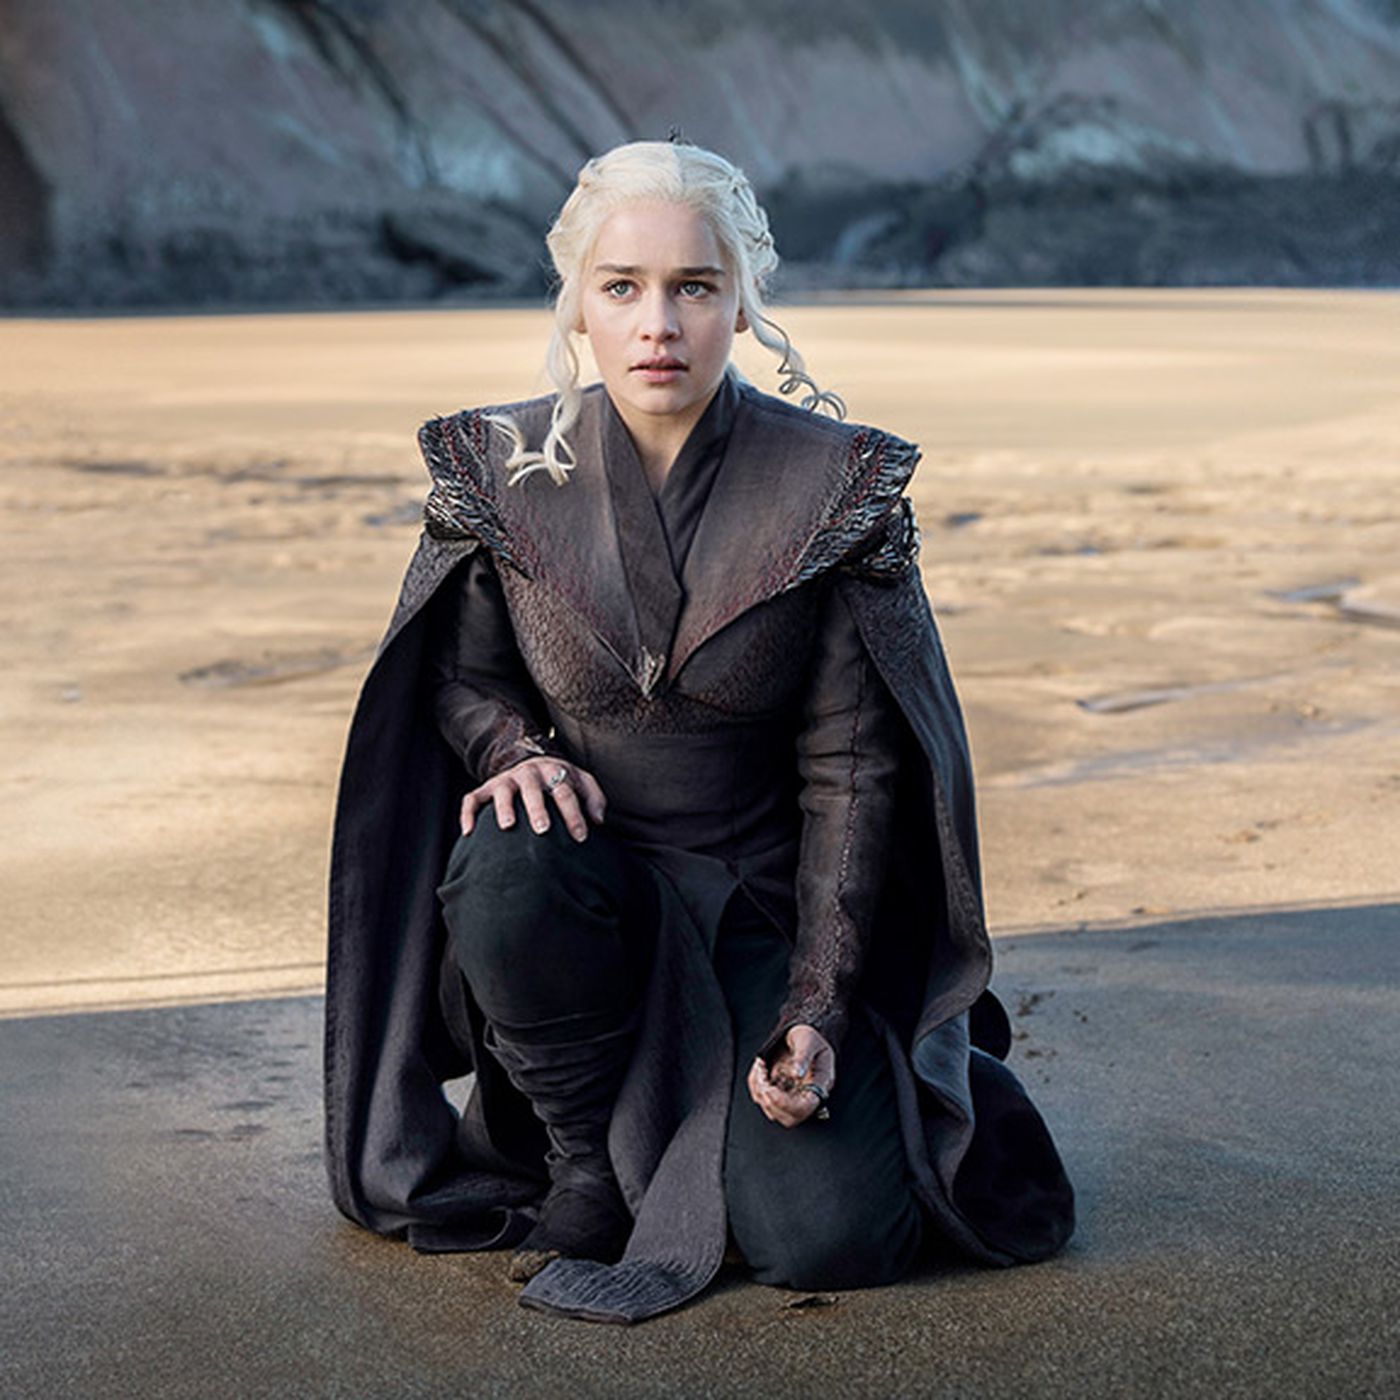 cyndi speakman recommends game of thrones vag pic